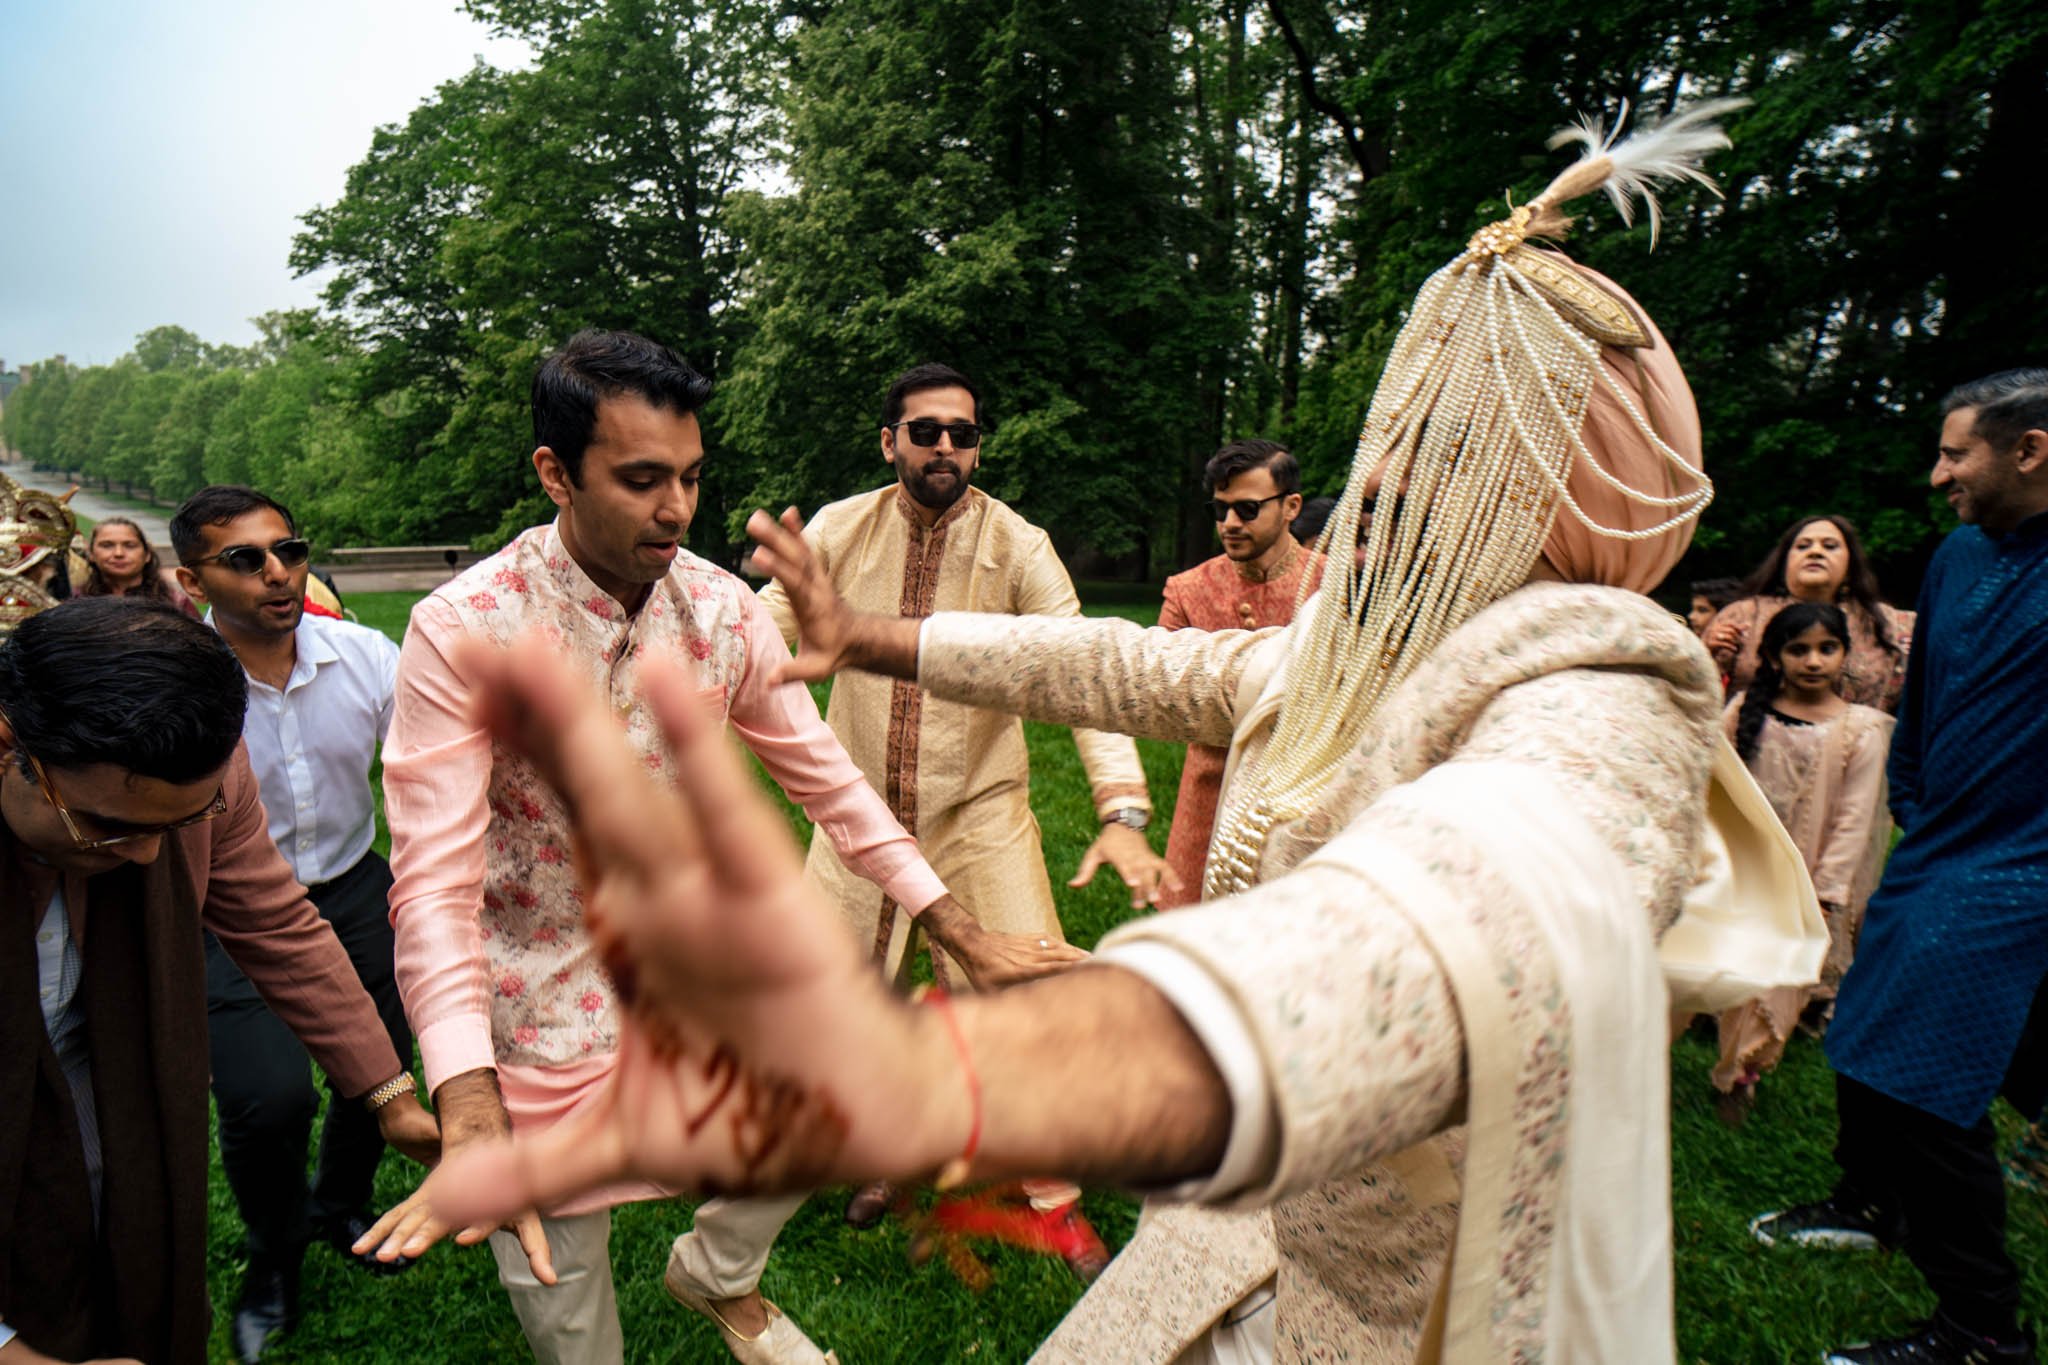 A group of Indian men performing traditional dance at a Biltmore Estate wedding.